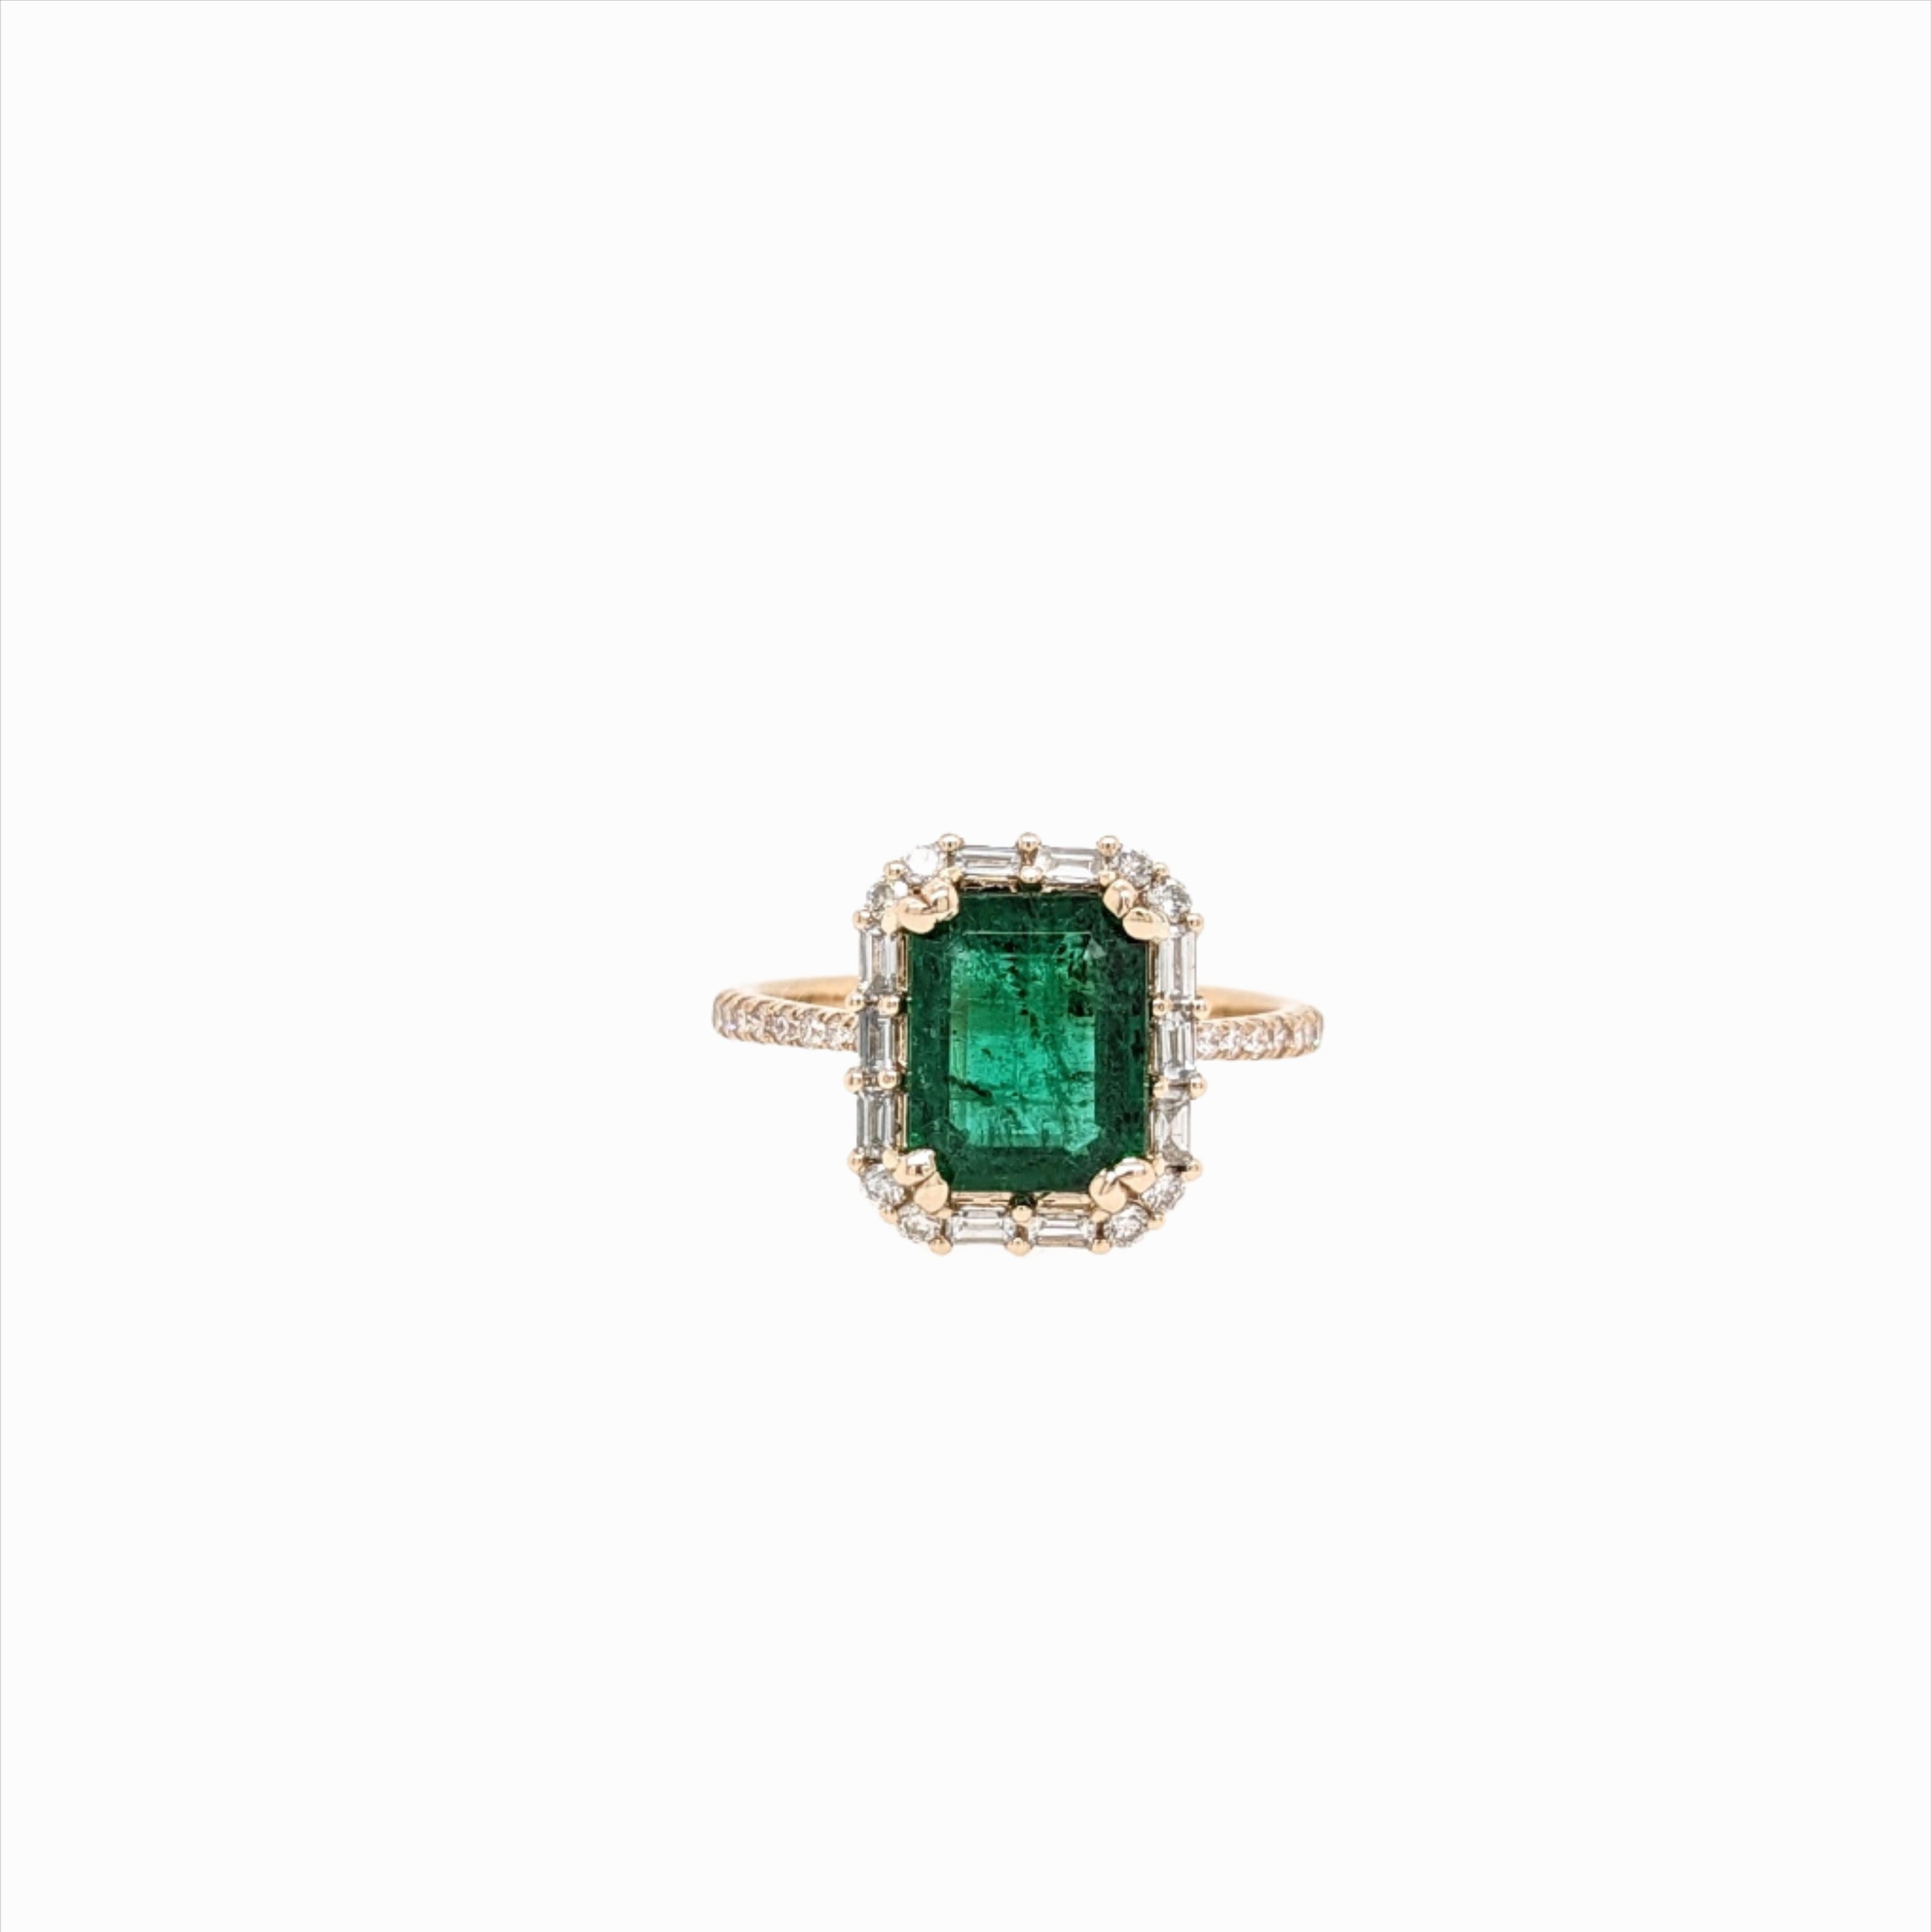 2ct Emerald Ring w Natural Diamonds in Solid 14k Yellow Gold Emerald cut 9x7mm